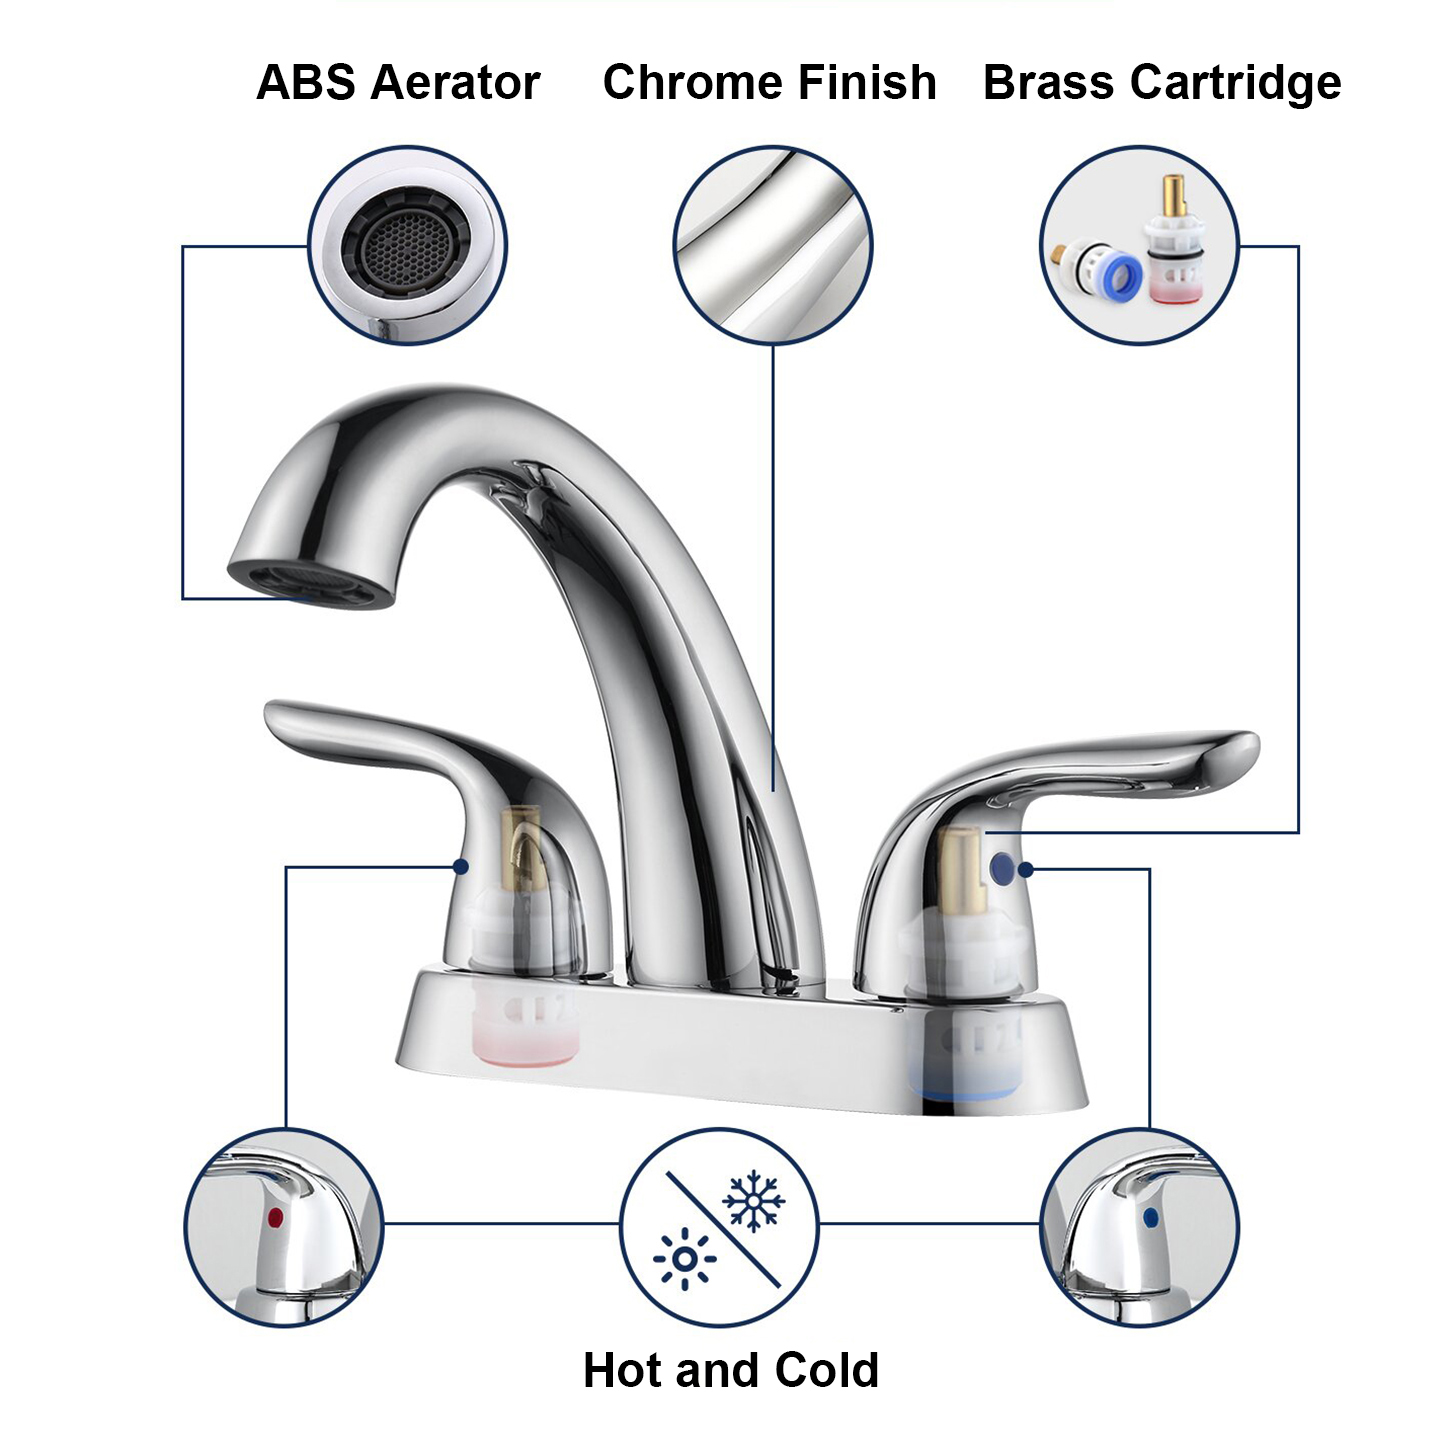 4 inch 2 Handle Brass Chrome Universal Centerset Faucet for Vanity Lavatory Basin Restroom